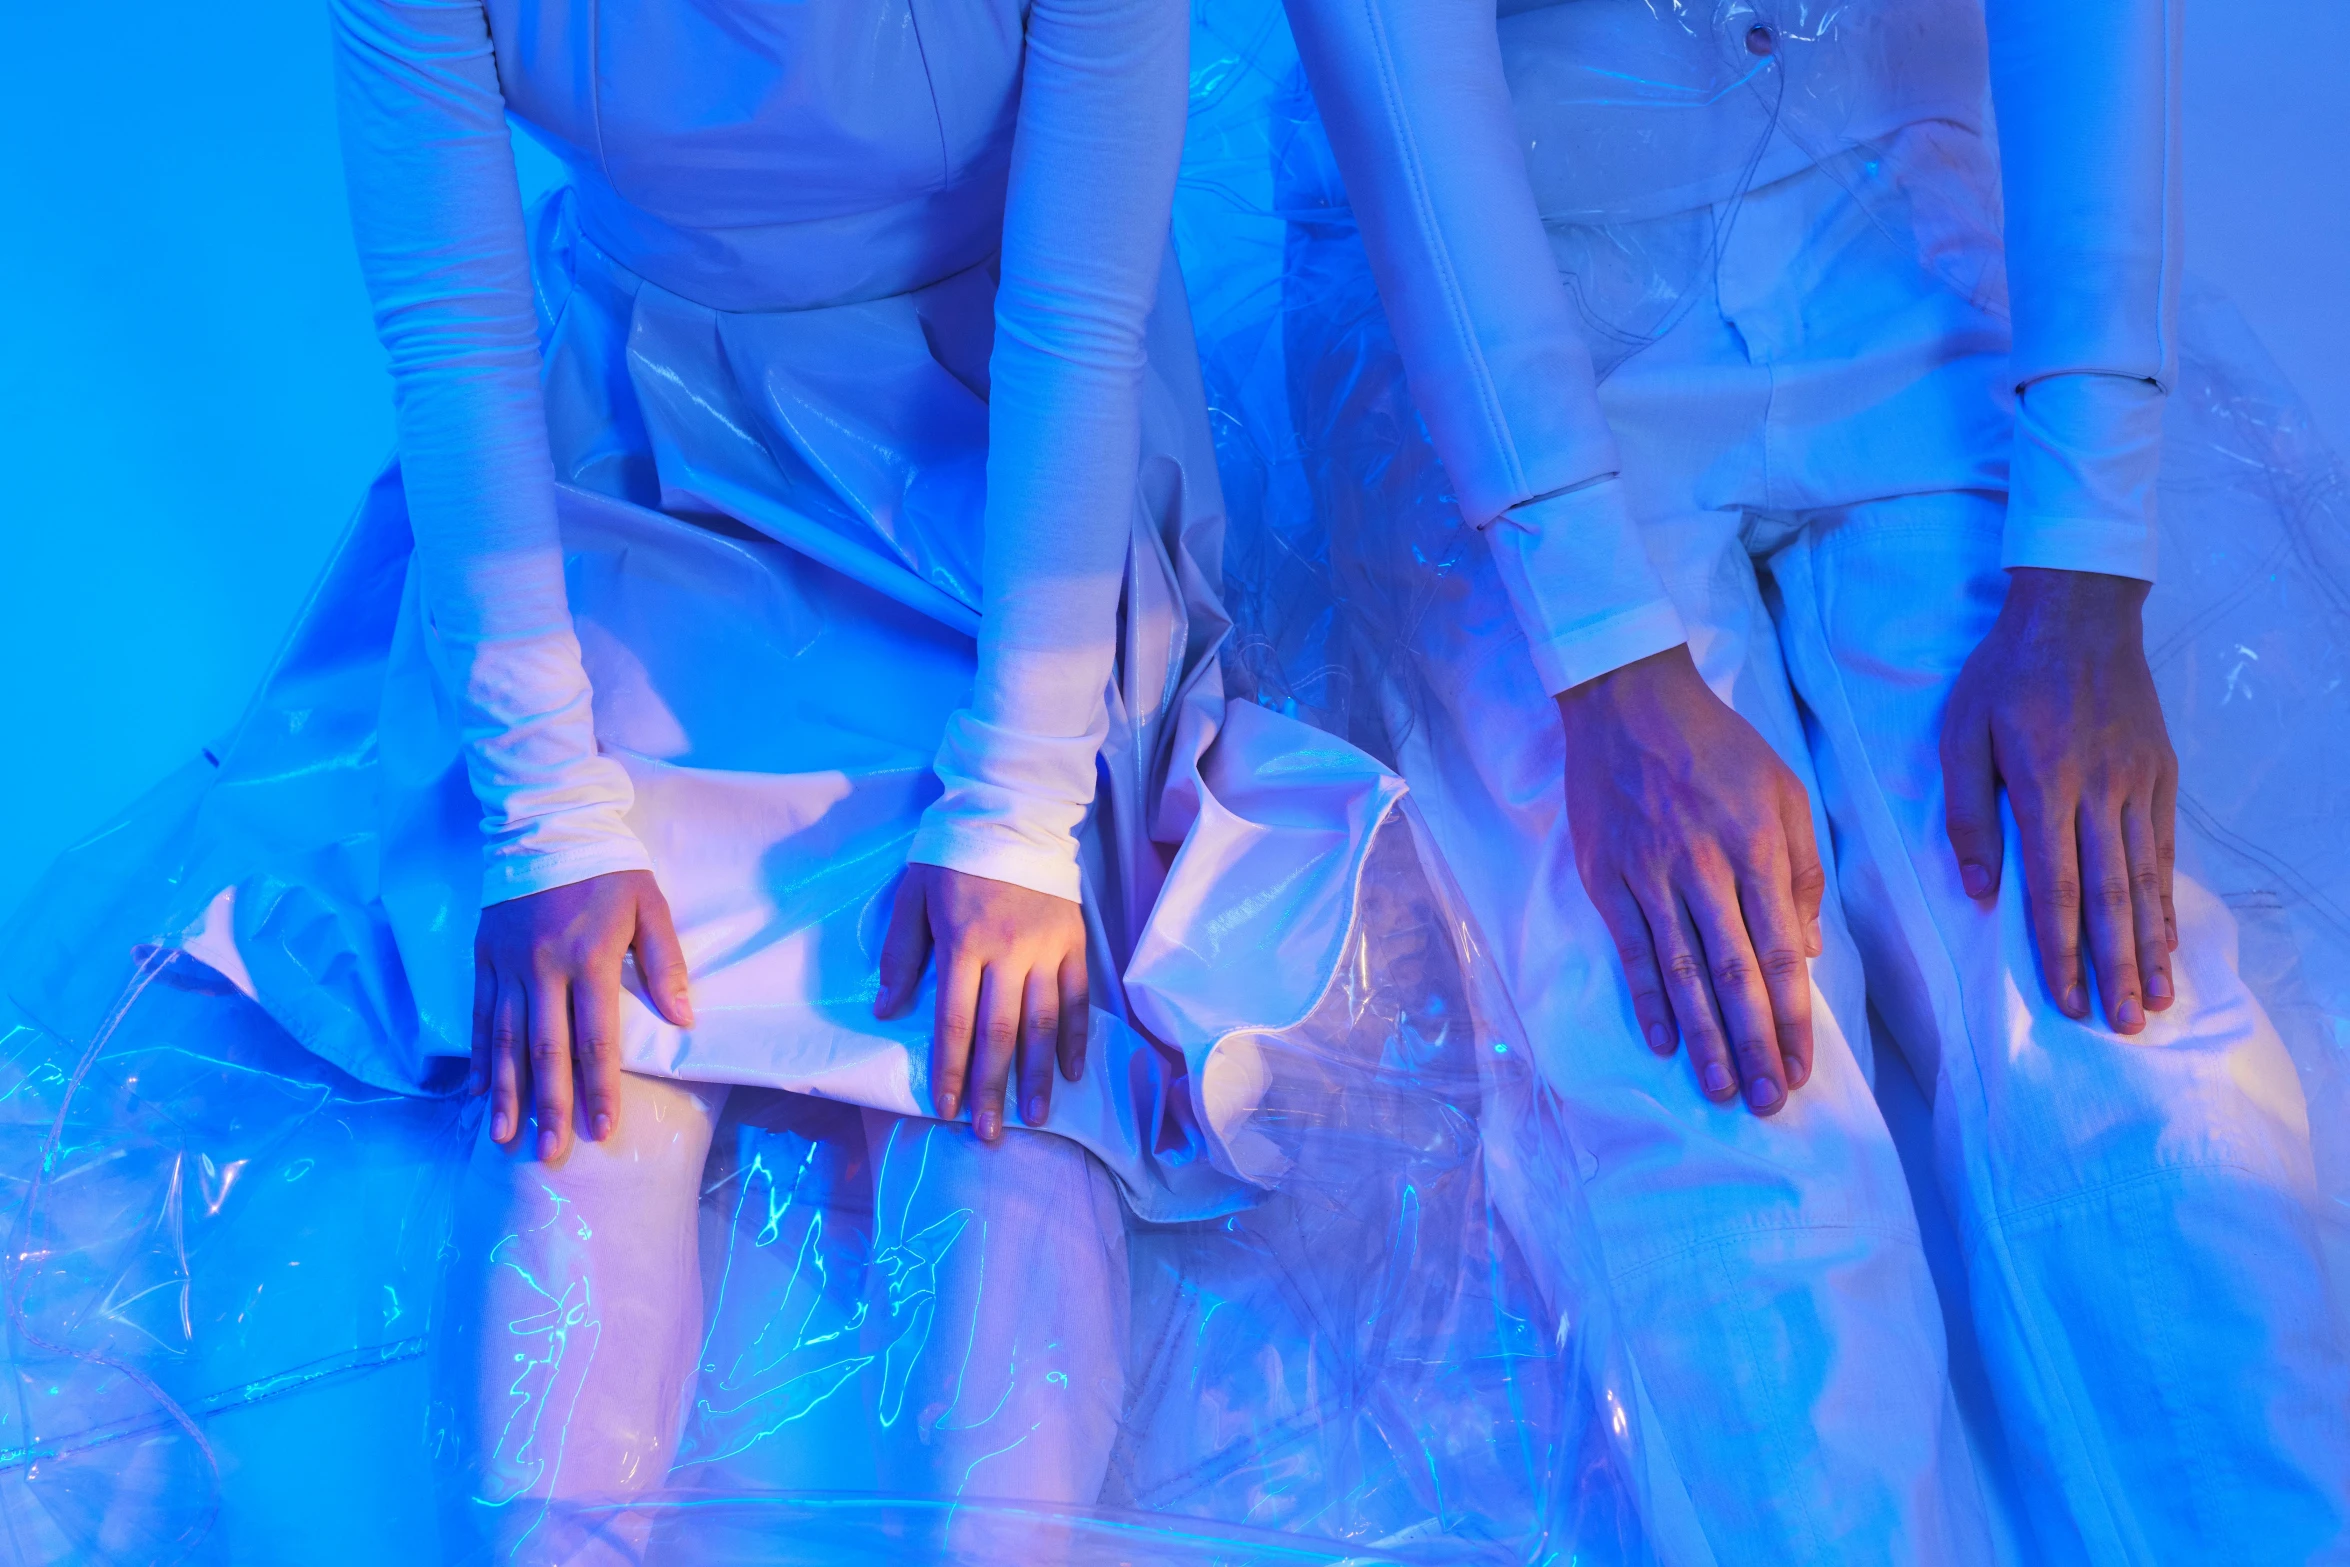 a couple of women sitting next to each other, an album cover, by Julia Pishtar, unsplash, process art, blue shiny lighting, white gloves, futuristic fashion show, plastic and fabric